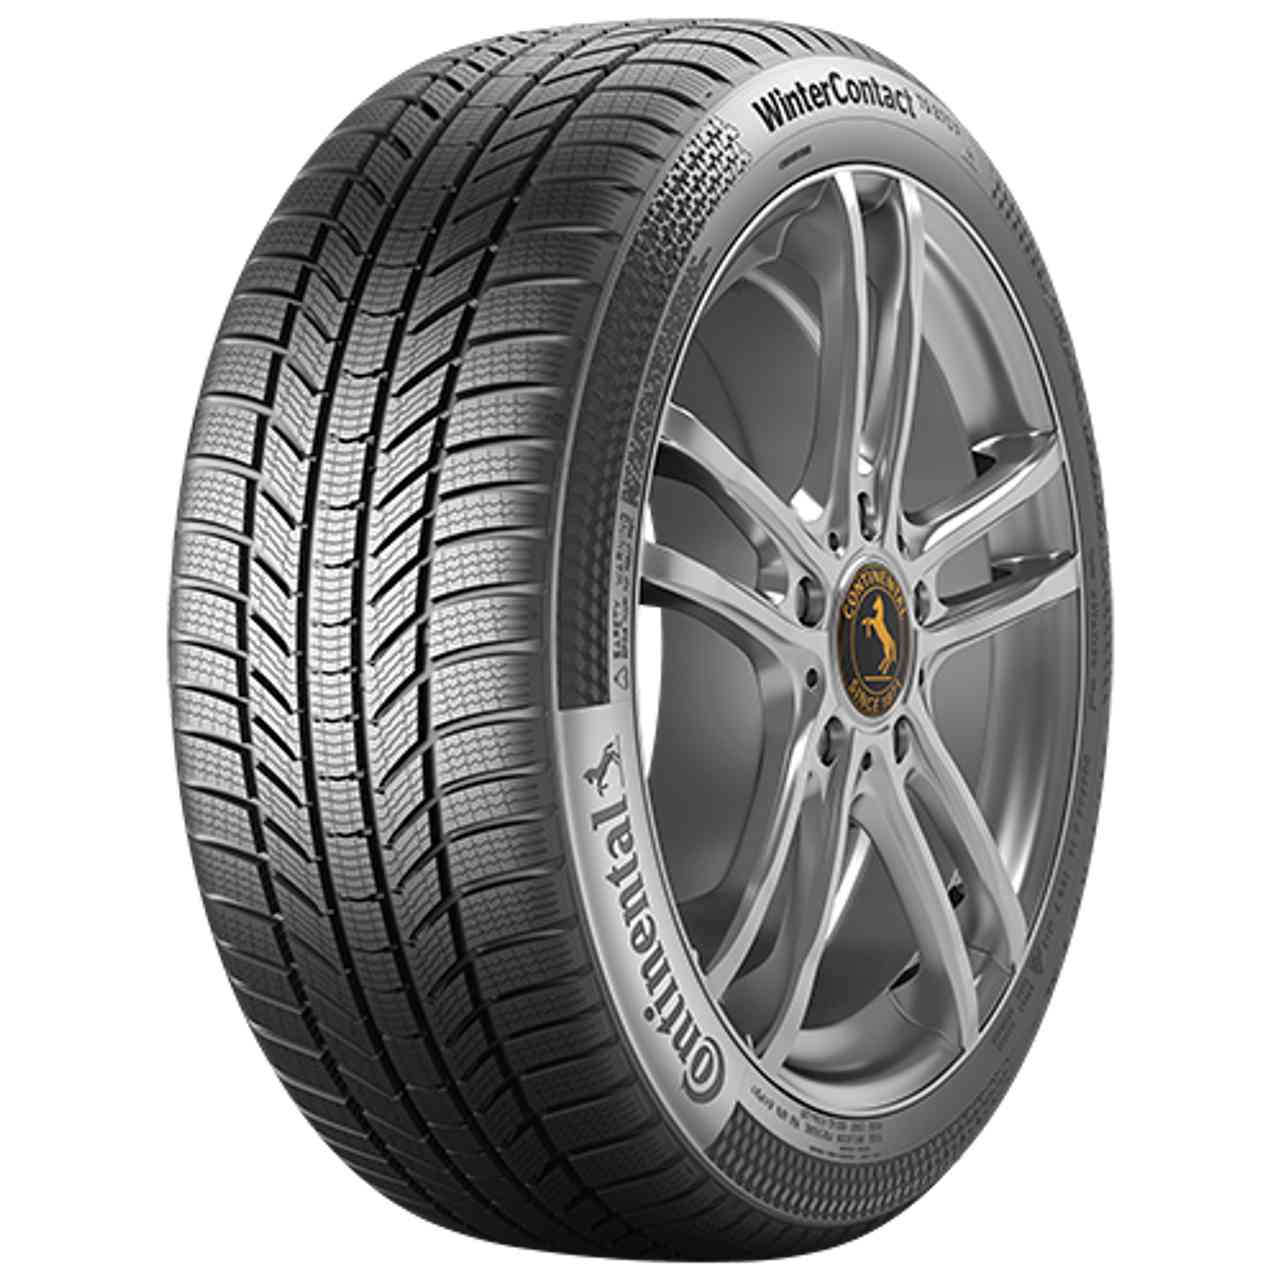 CONTINENTAL WINTERCONTACT TS 870 P (EVc) 235/55R19 105H FR BSW XL